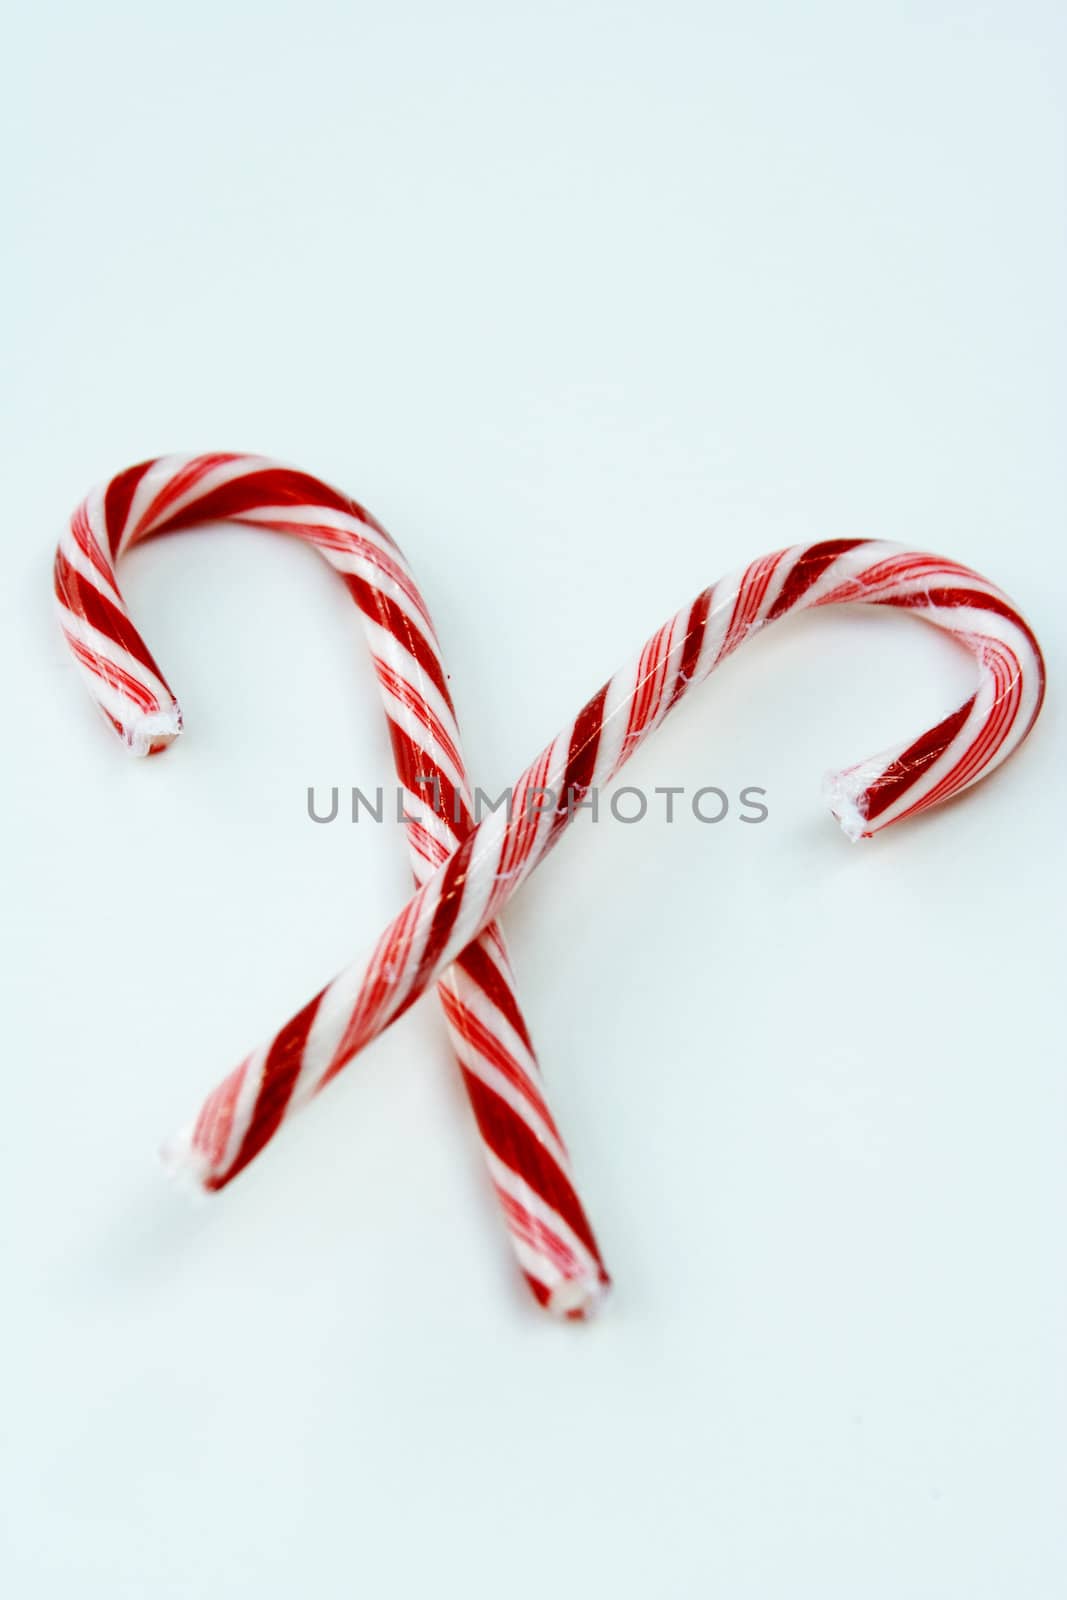 Candy canes on white just in time for the holidays